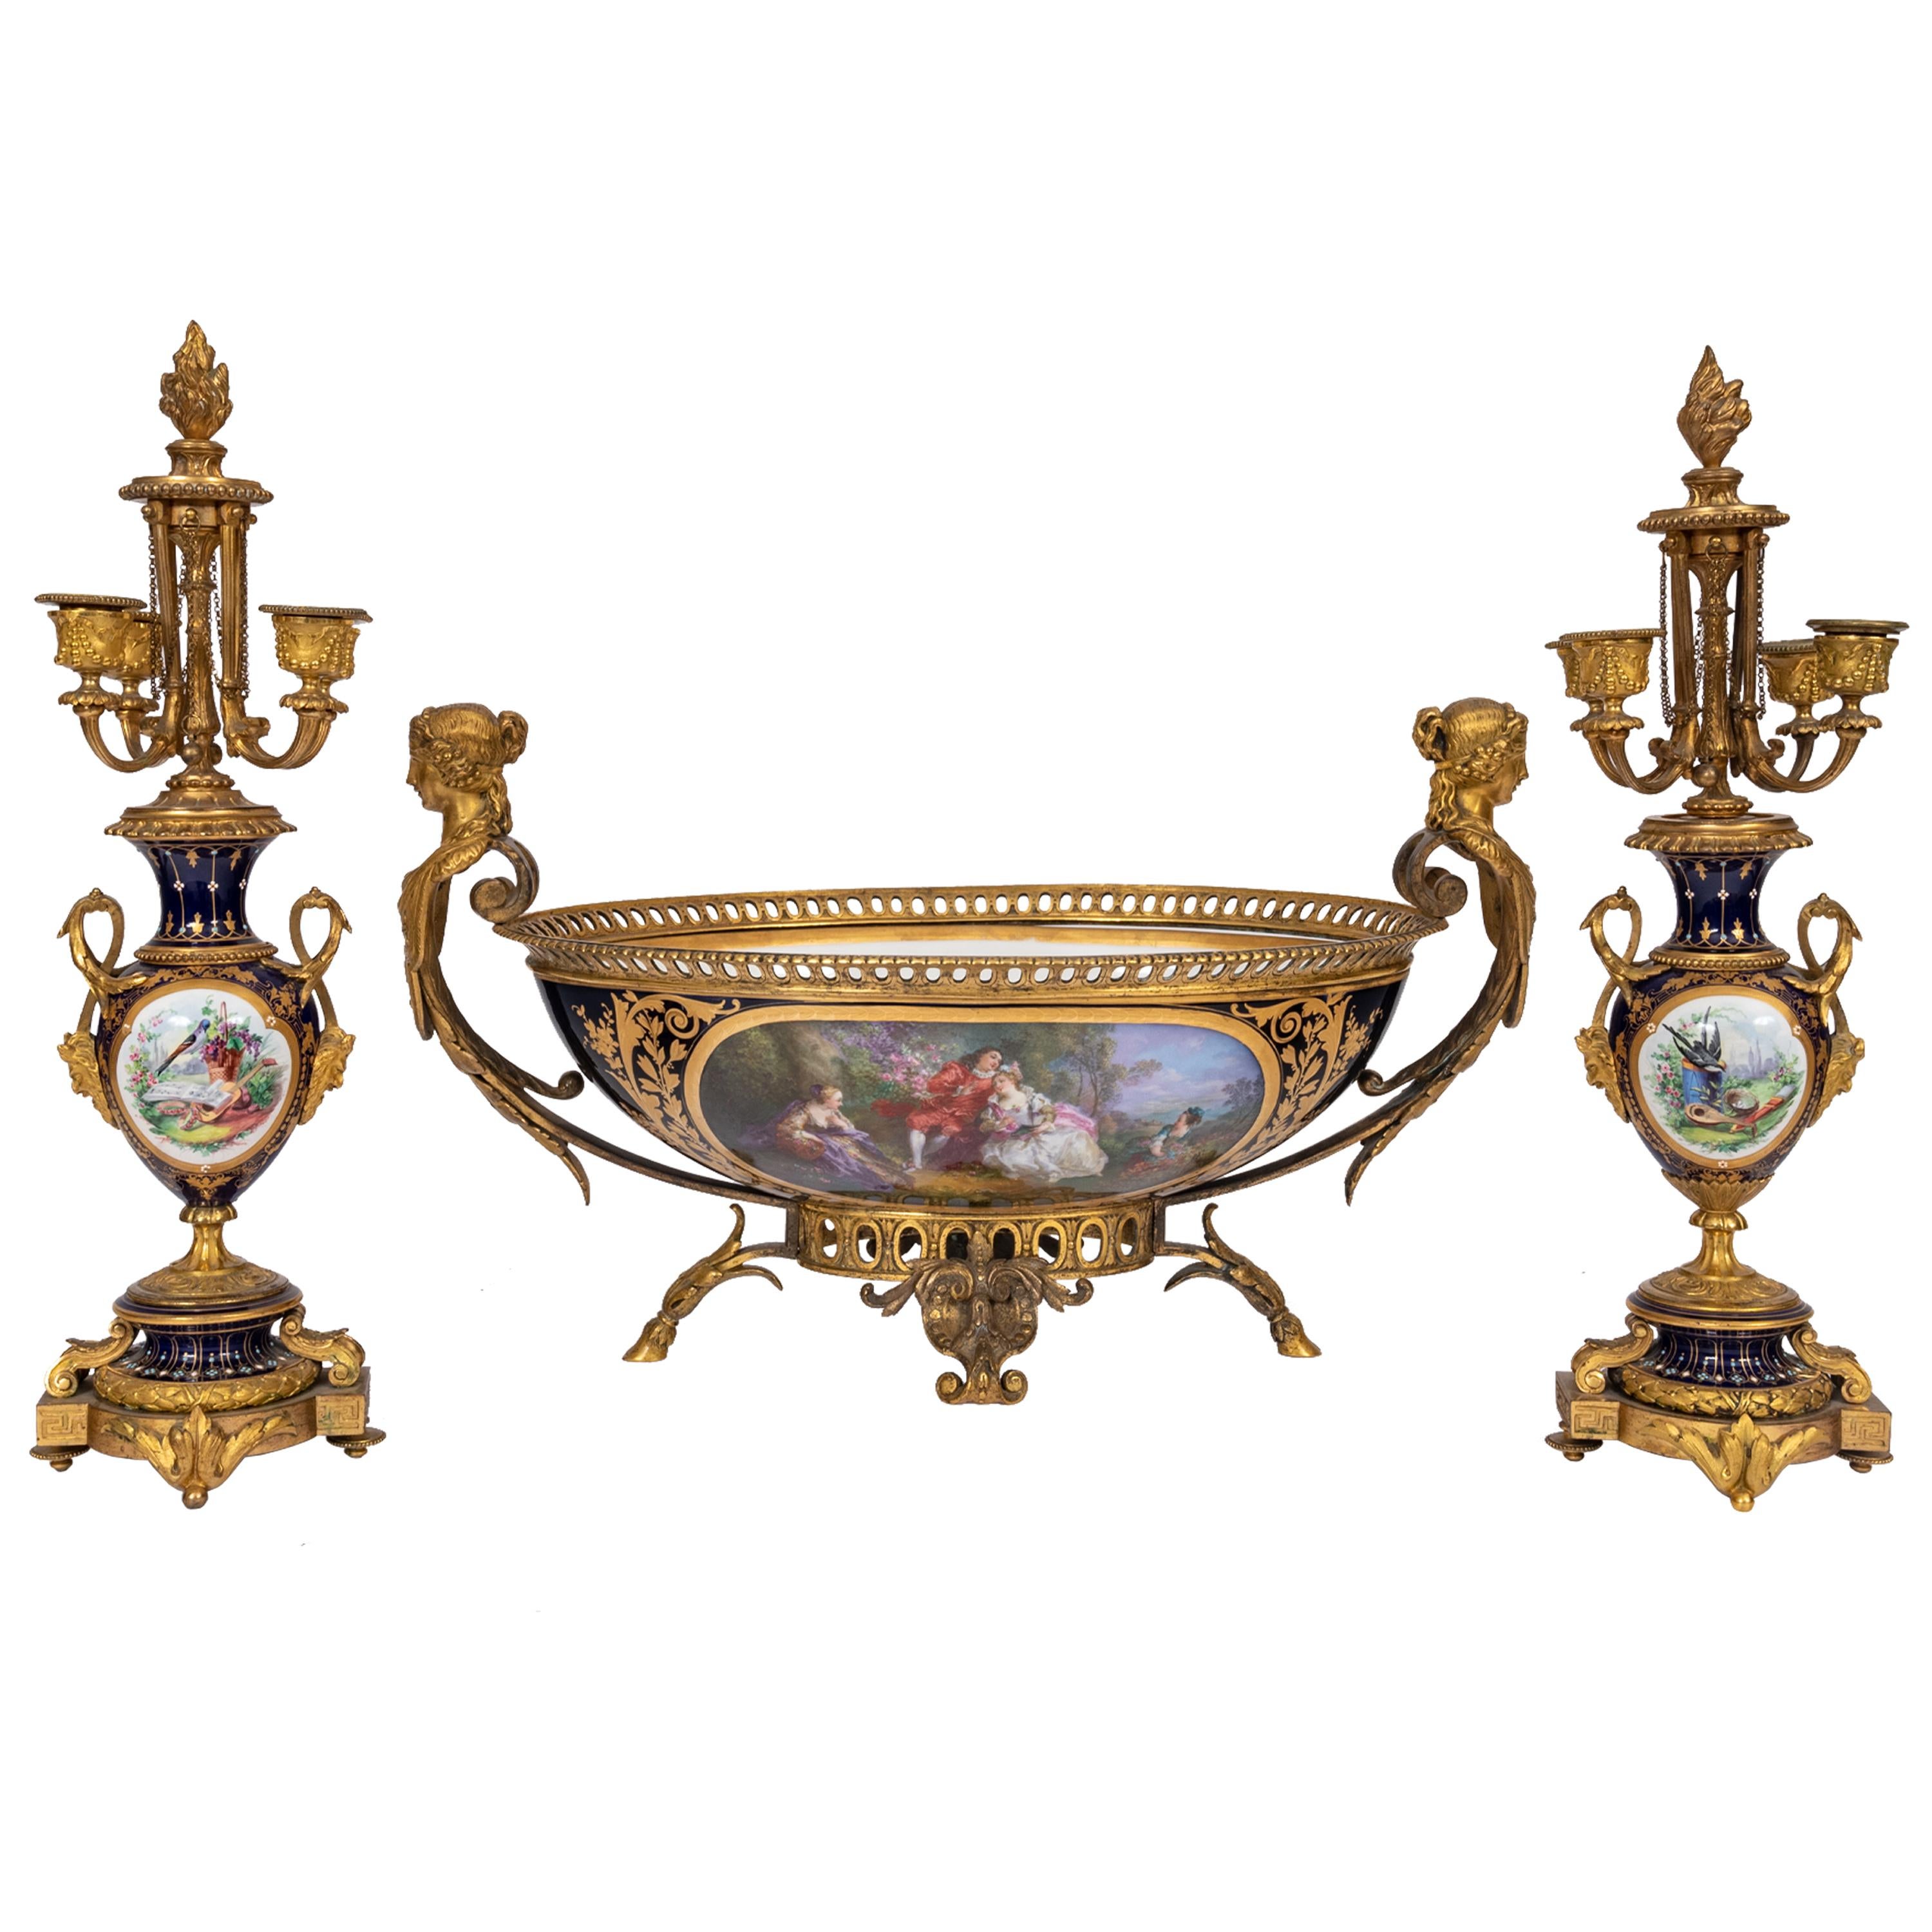 A fine & large antique 'Sevres' porcelain three piece garniture, circa 1880.
The garniture comprising a pair of candelarbra and a large jardiniere centerpiece, each candelarbrum having four branches decorated with garlands and chains, to the top a